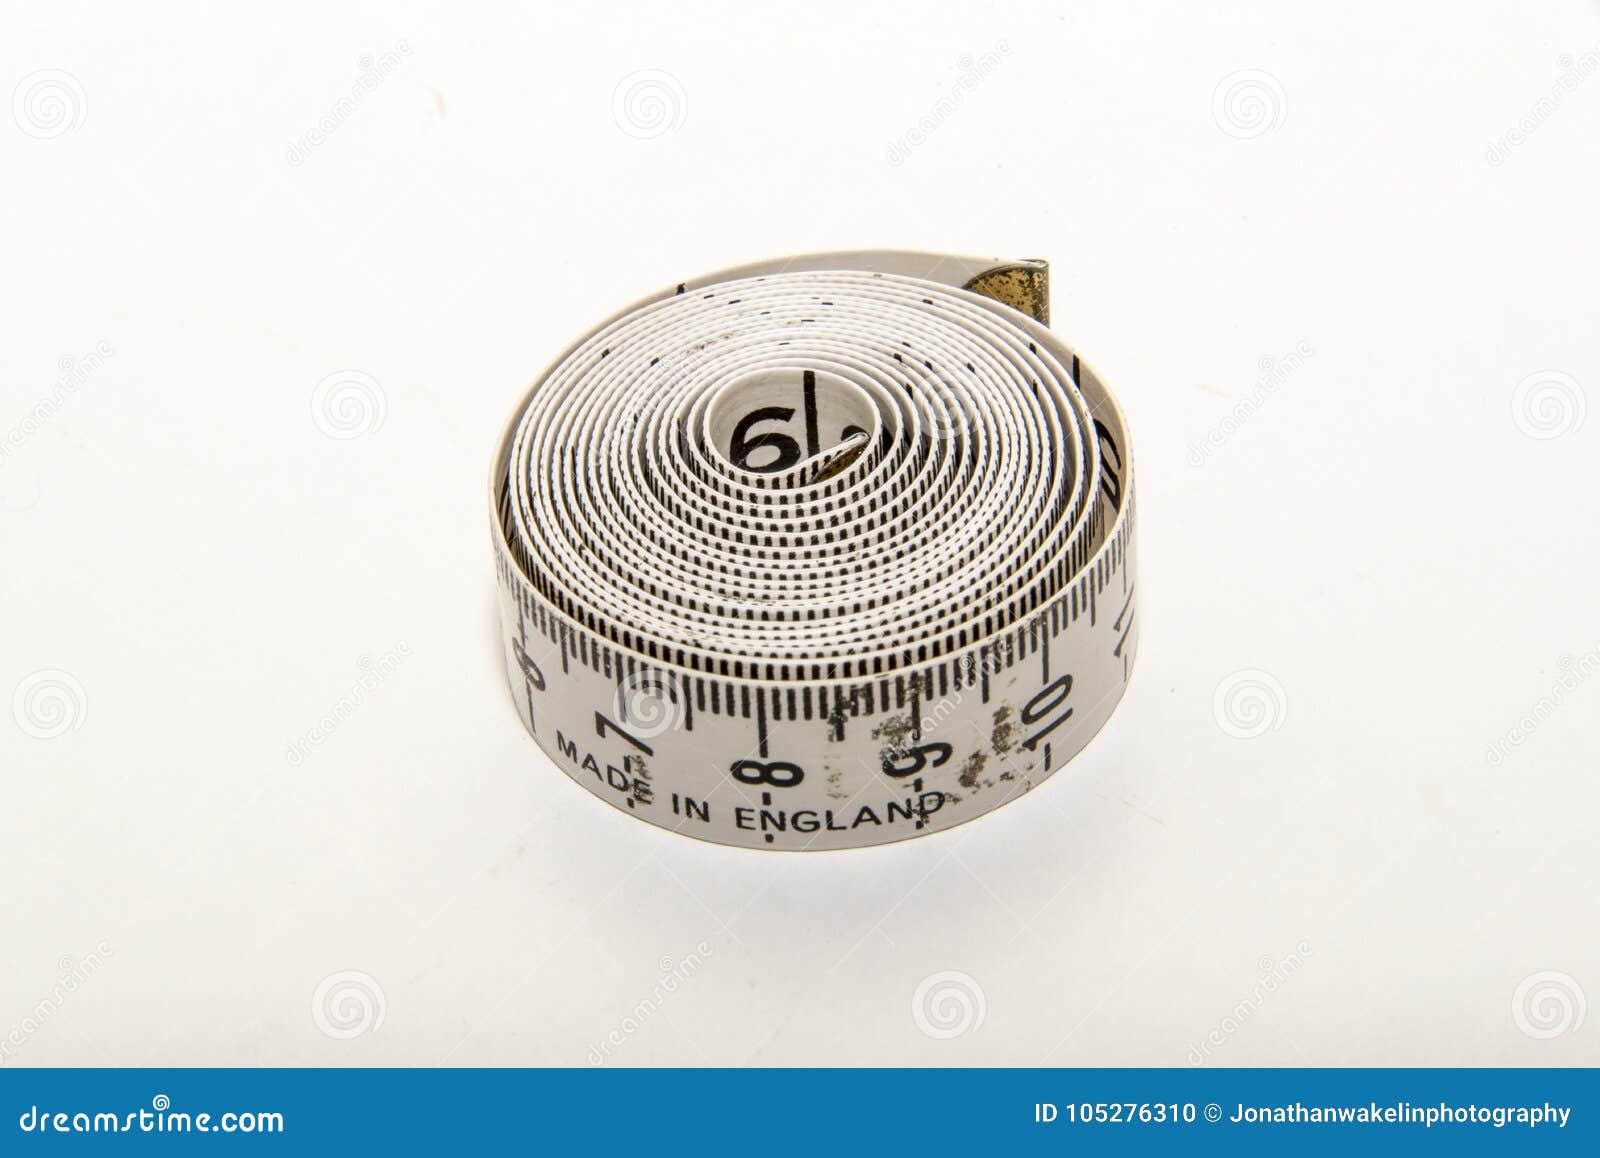 A Small Fabric Tape Measure on a White Background Stock Photo - Image of  england, white: 105276310